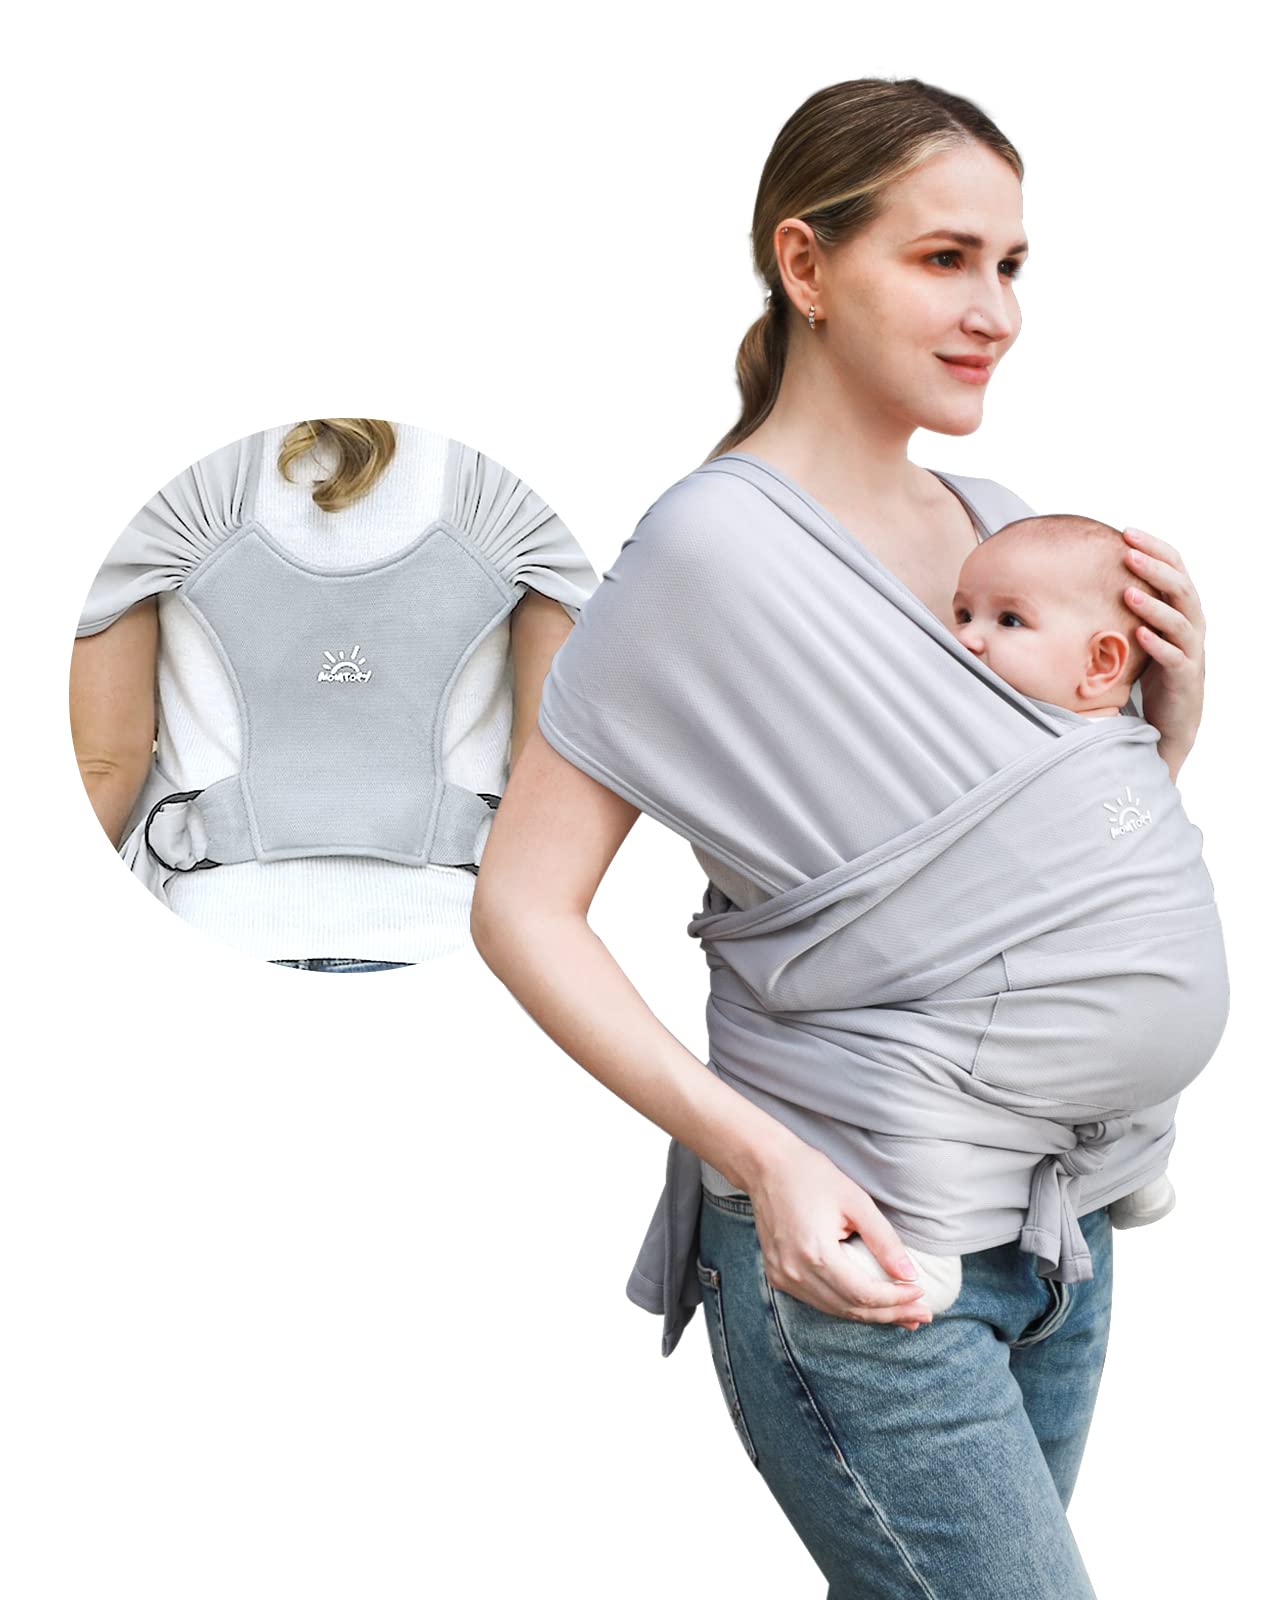 Baby Wraps Carrier/ Sling for Newborn to Toddler, Breathable and Hands Free, Adjustable Carriers (Light Grey)